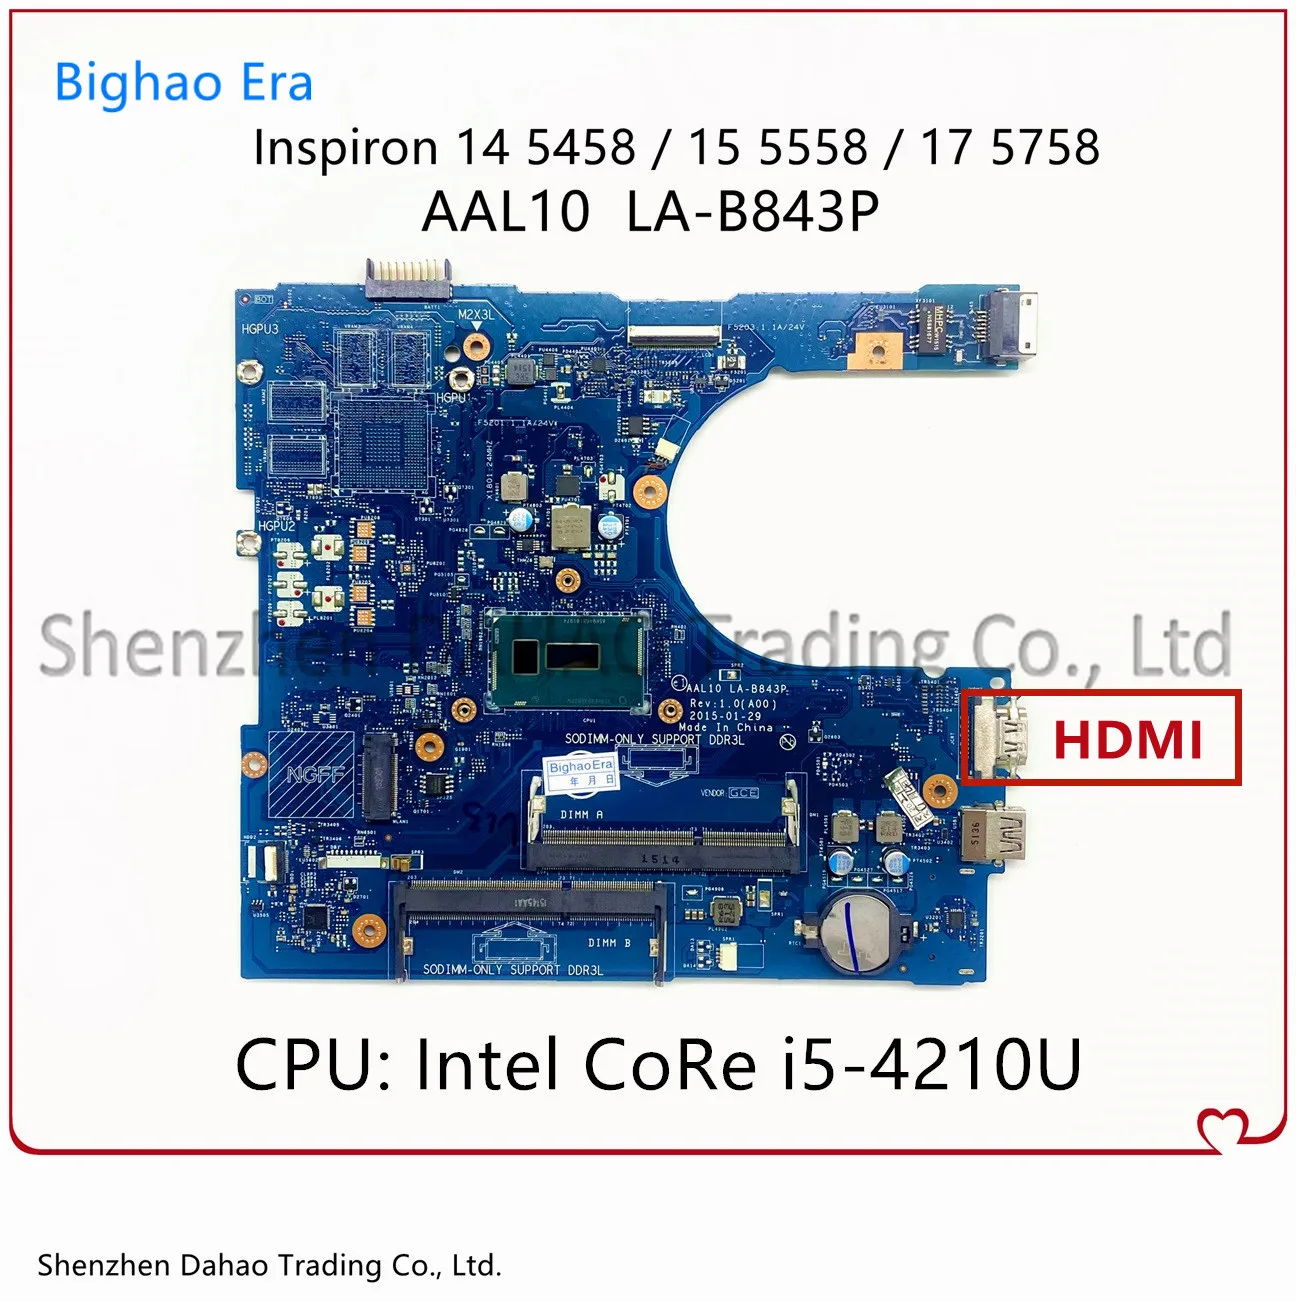 

CN-00HJC9 0HJC9 For Dell Inspiron 14-5458 15-5558 17-5758 Laptop Motherboard AAL10 LA-B843P With HDMI i5-4210U CPU